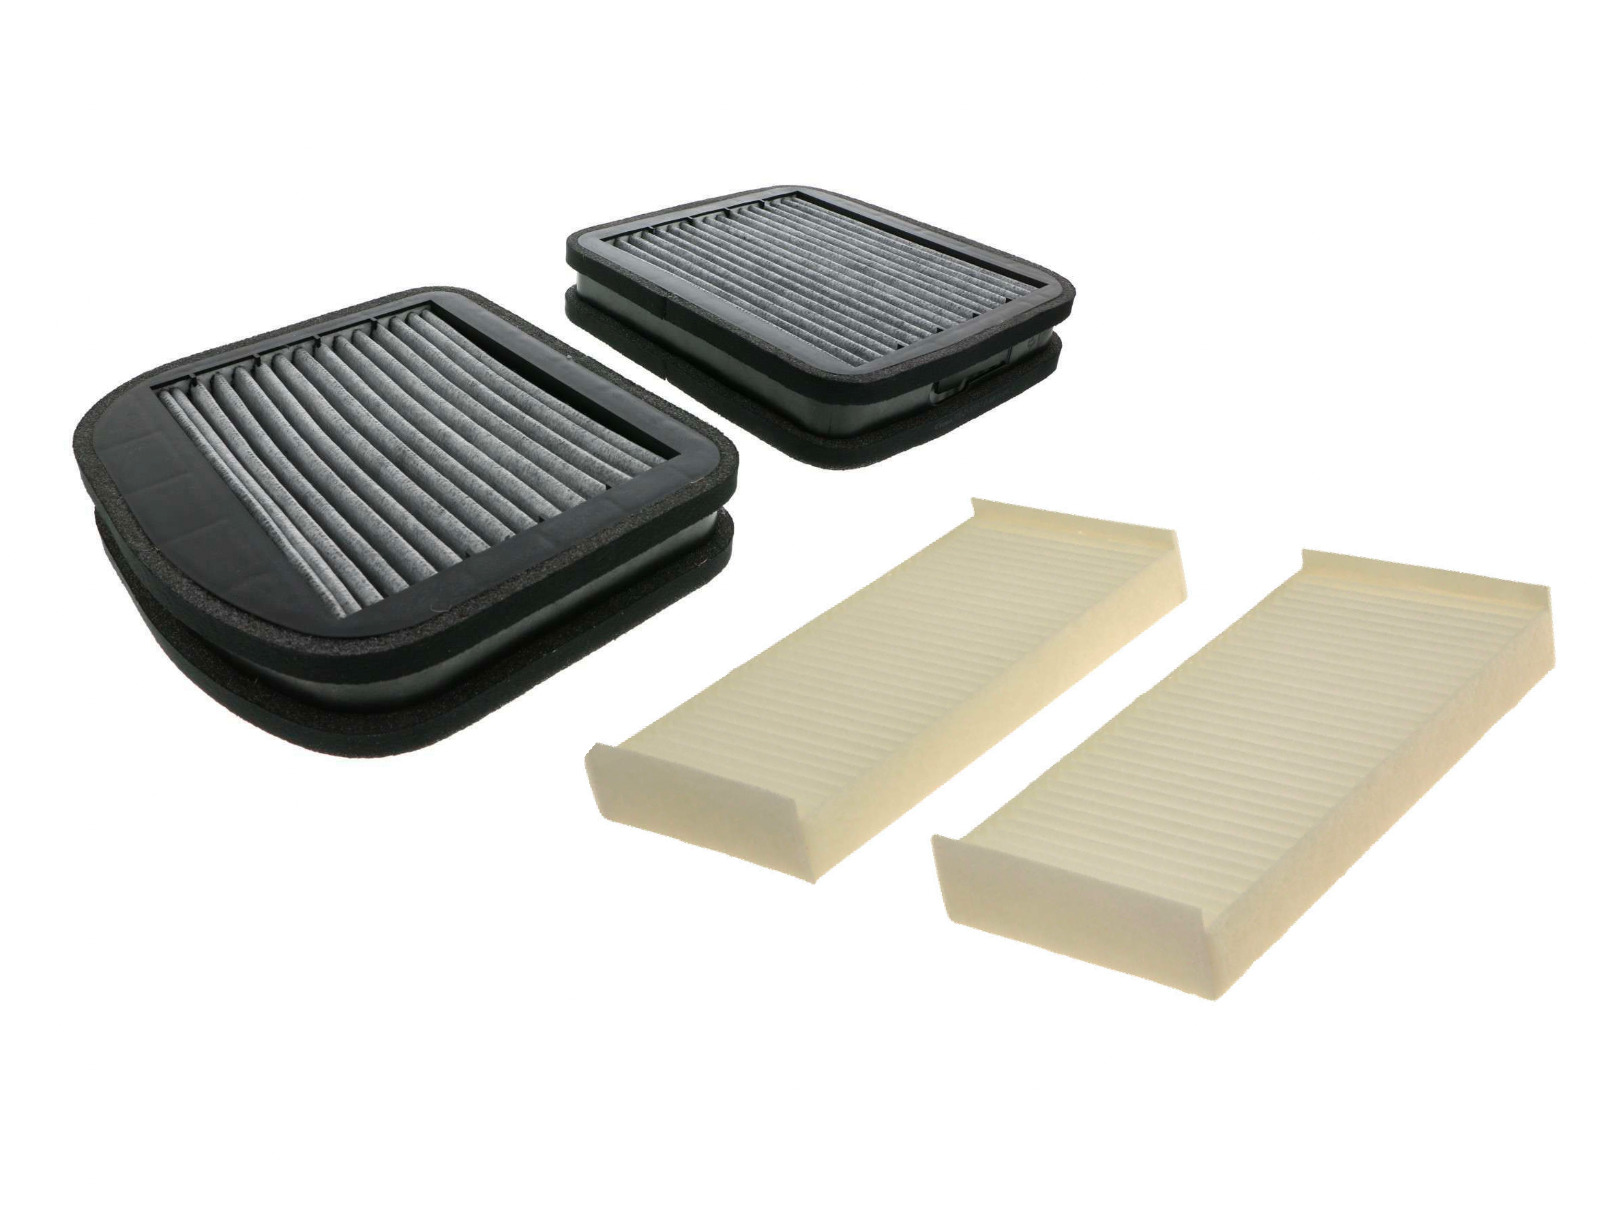 Cabin AC Air Filter Set Charcoal + Regular Filters for Mercedes W210 W215 W220